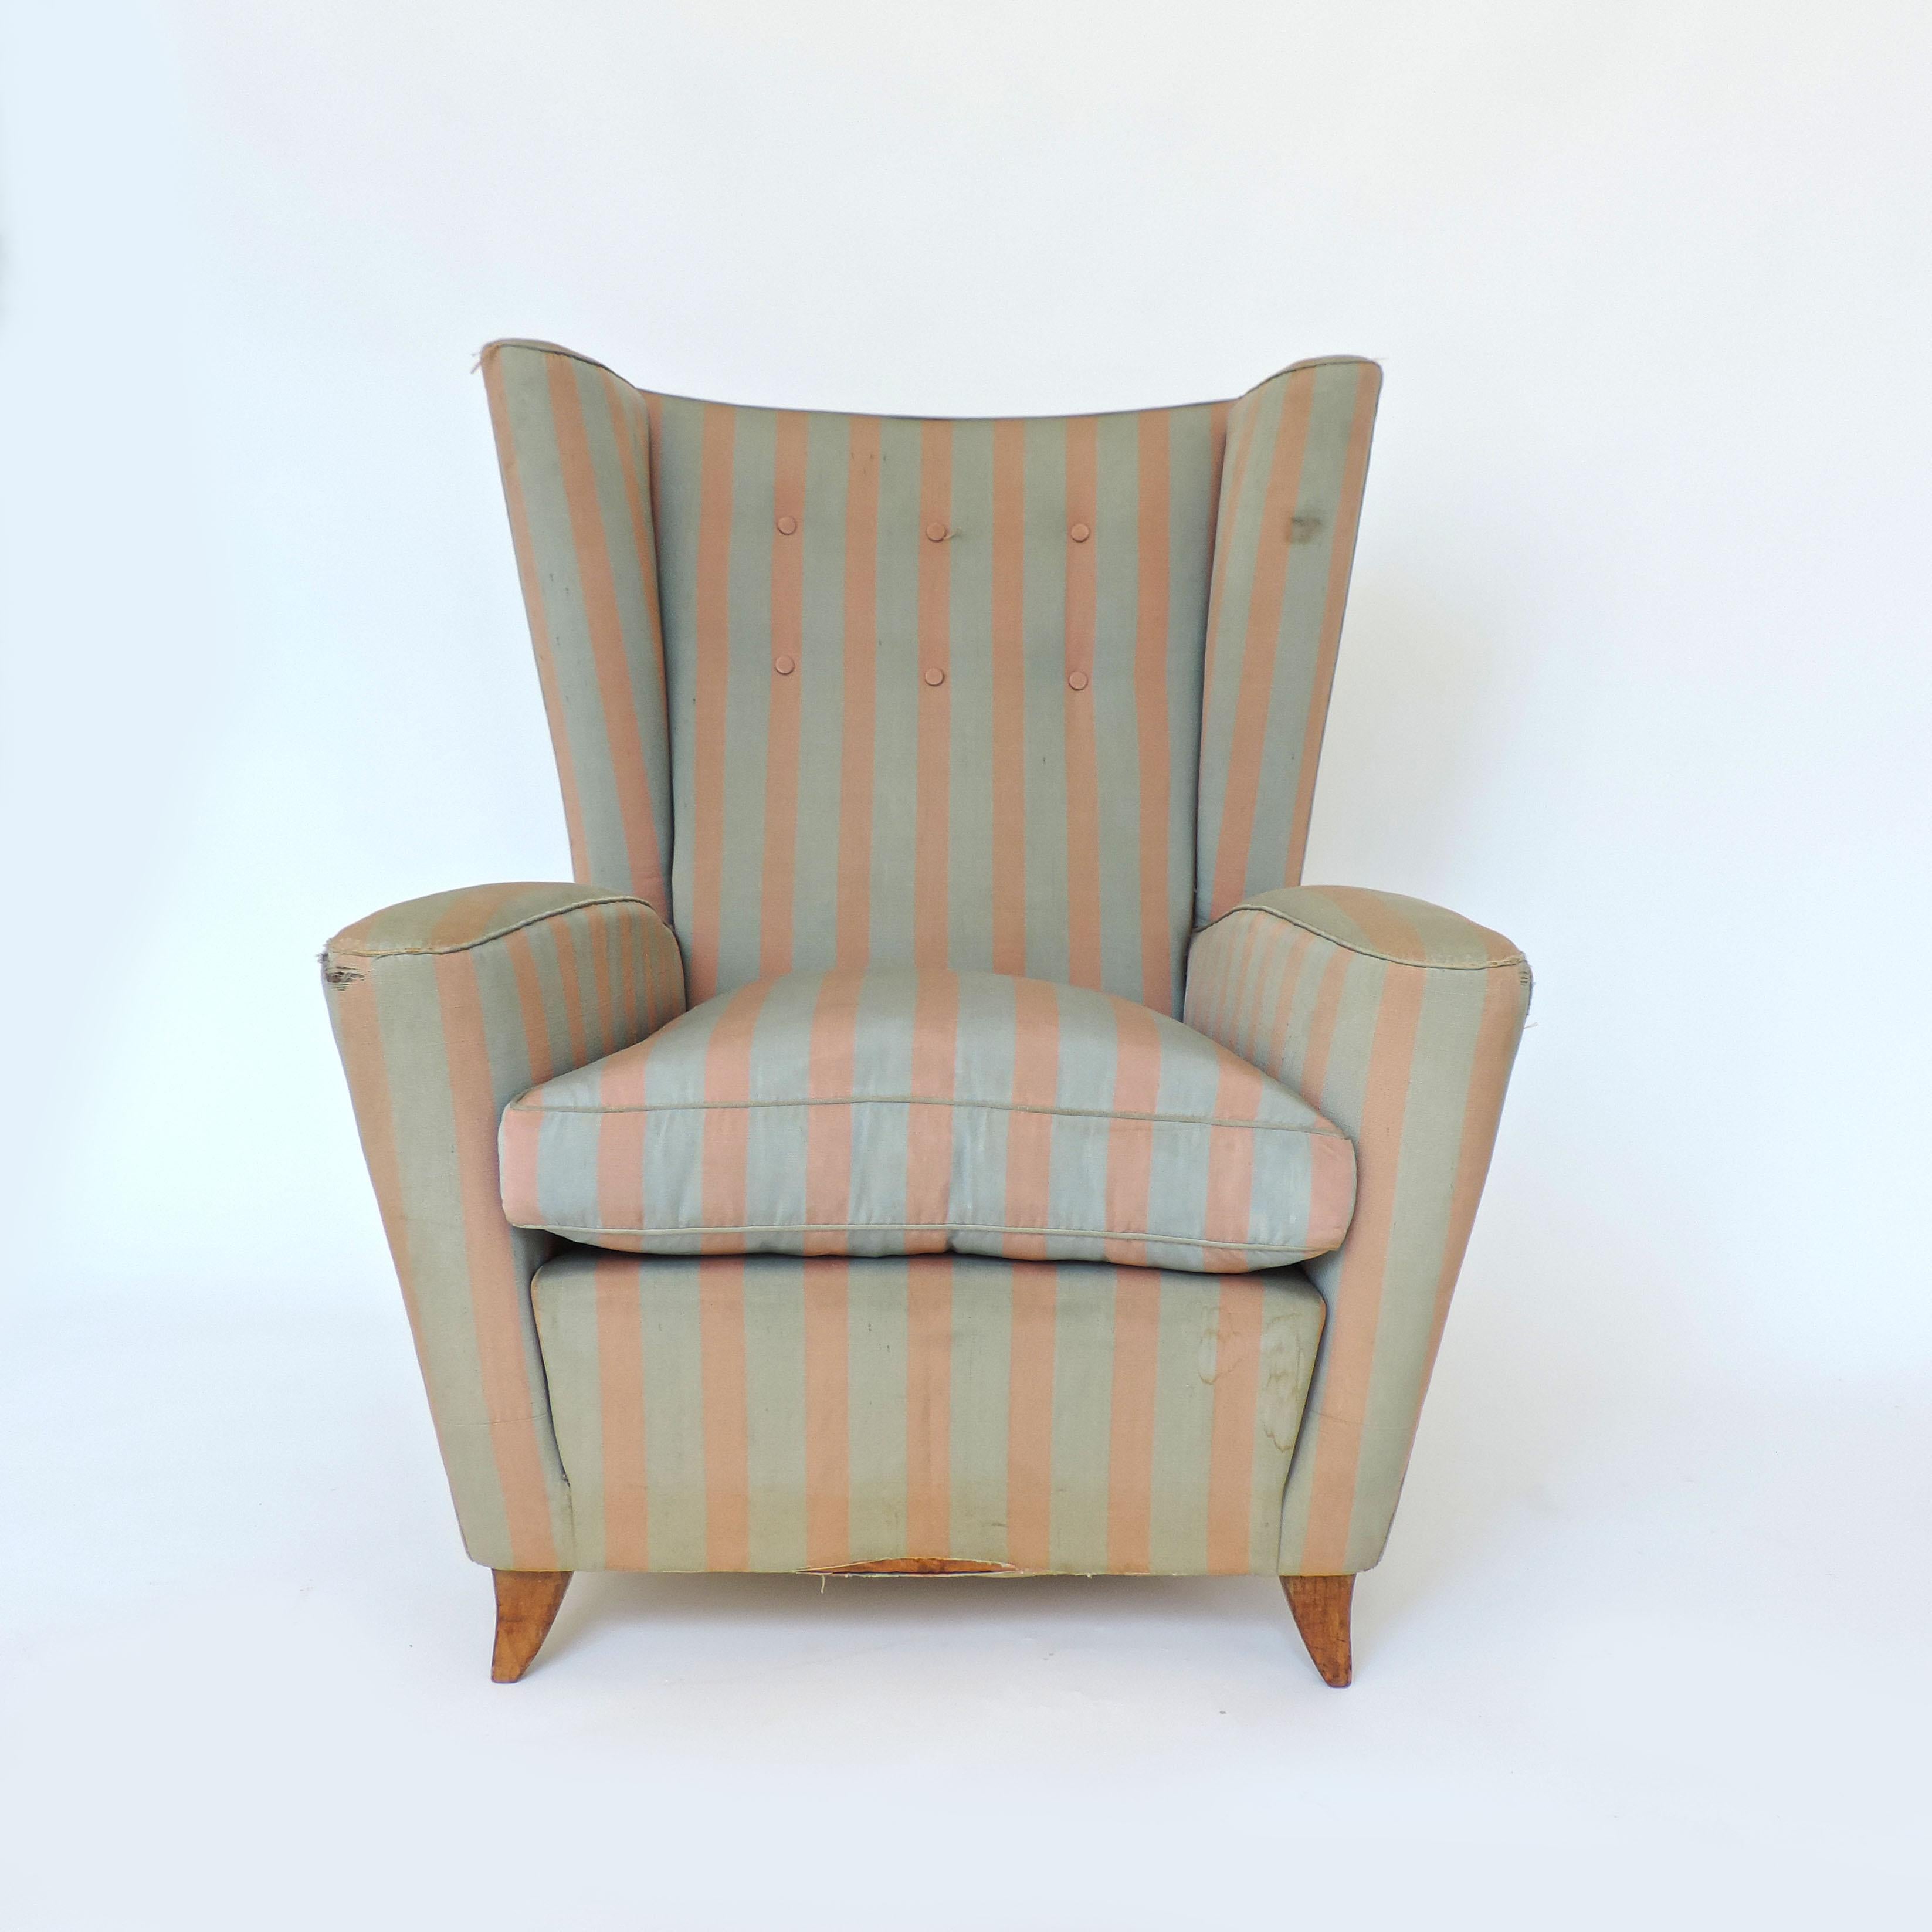 Paolo Buffa 1940s Armchair in Original Pink and Light Grey Stripes Fabric In Good Condition For Sale In Milan, IT